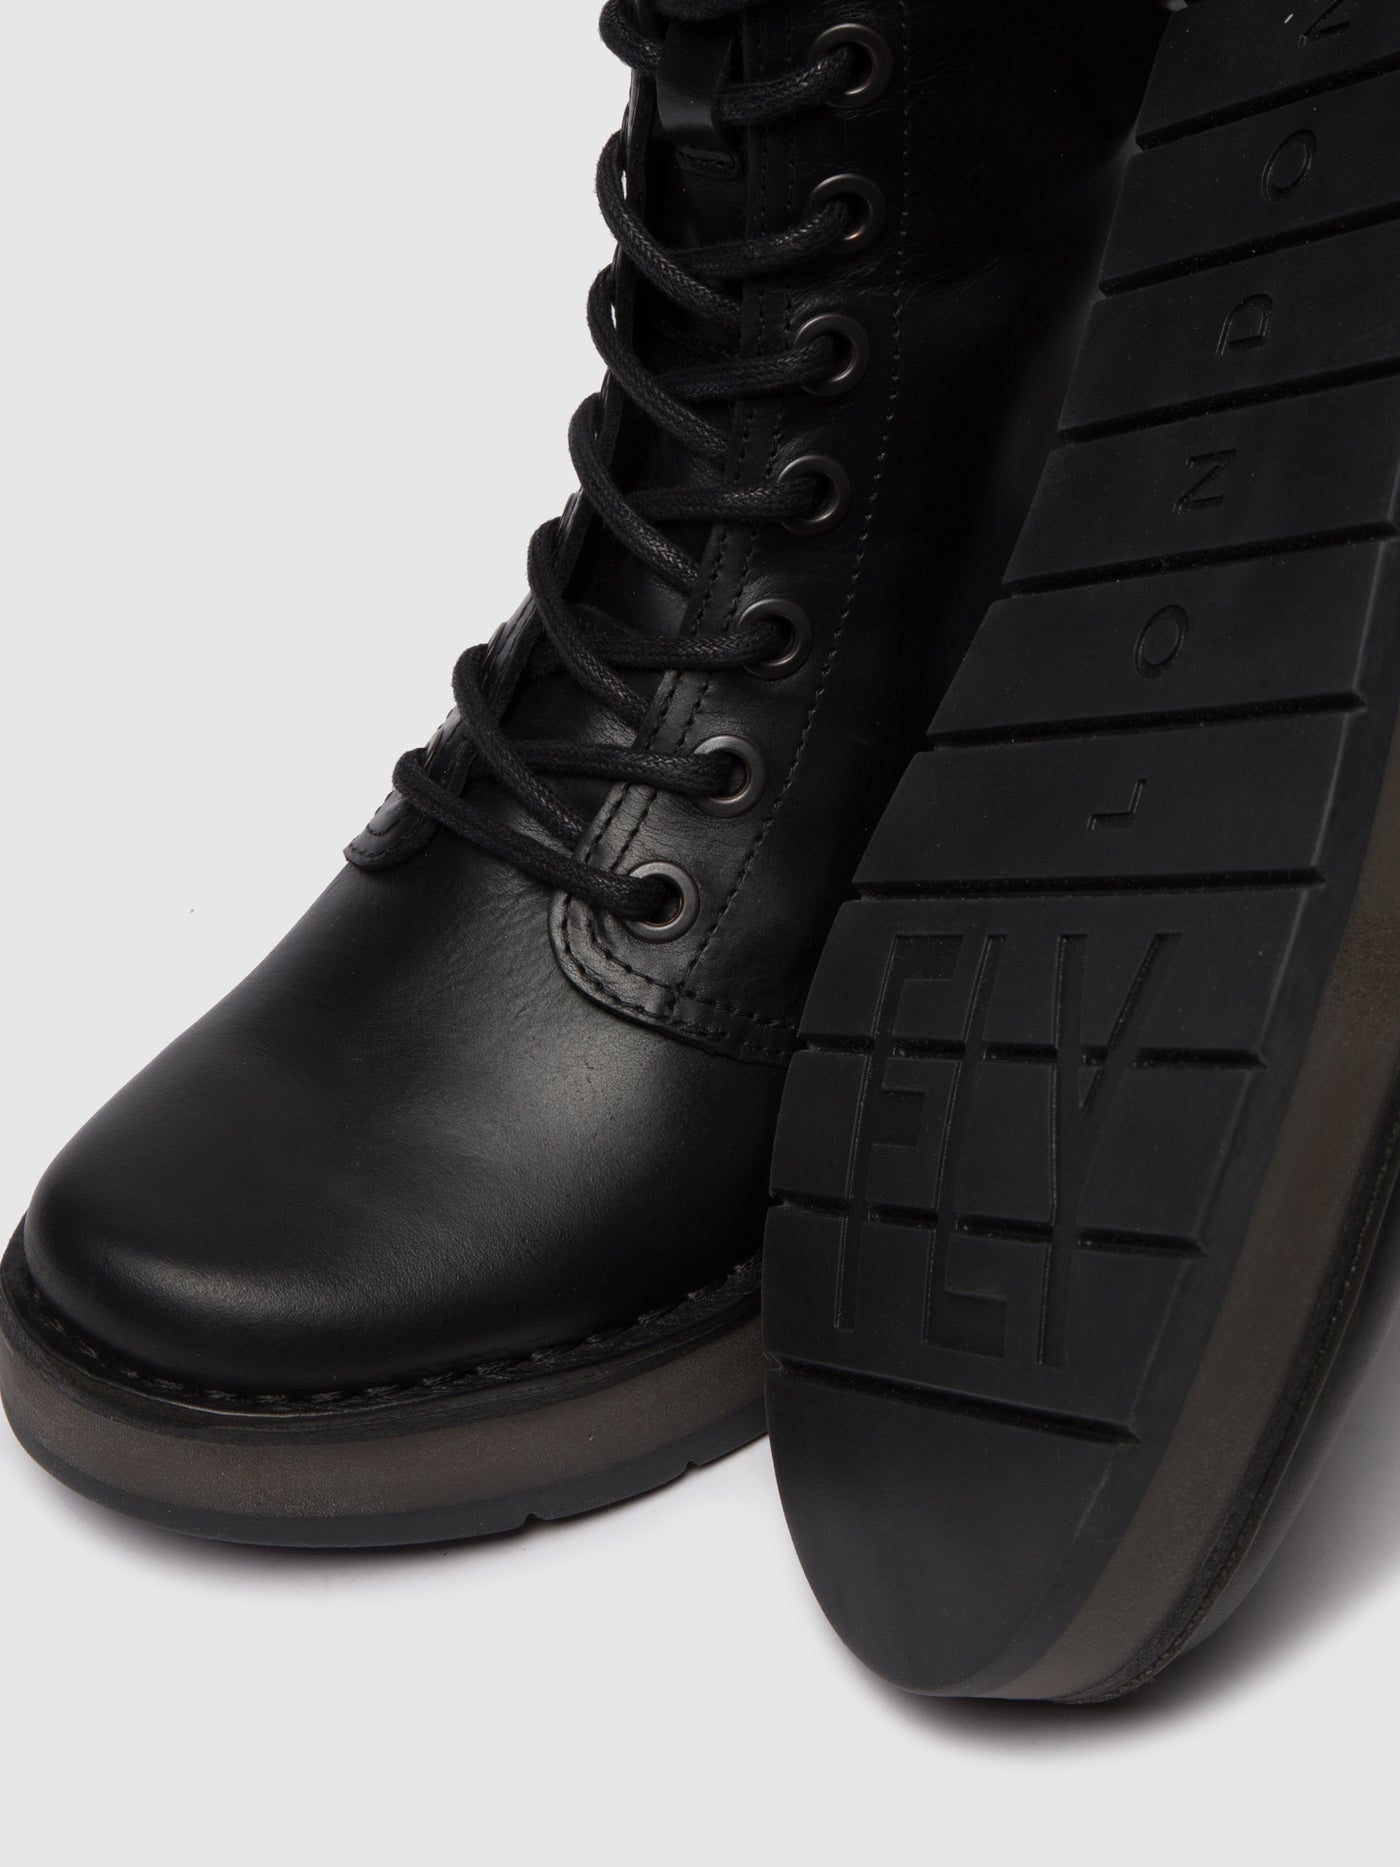 Lace-up Ankle Boots RAMI043FLY RUG BLACK